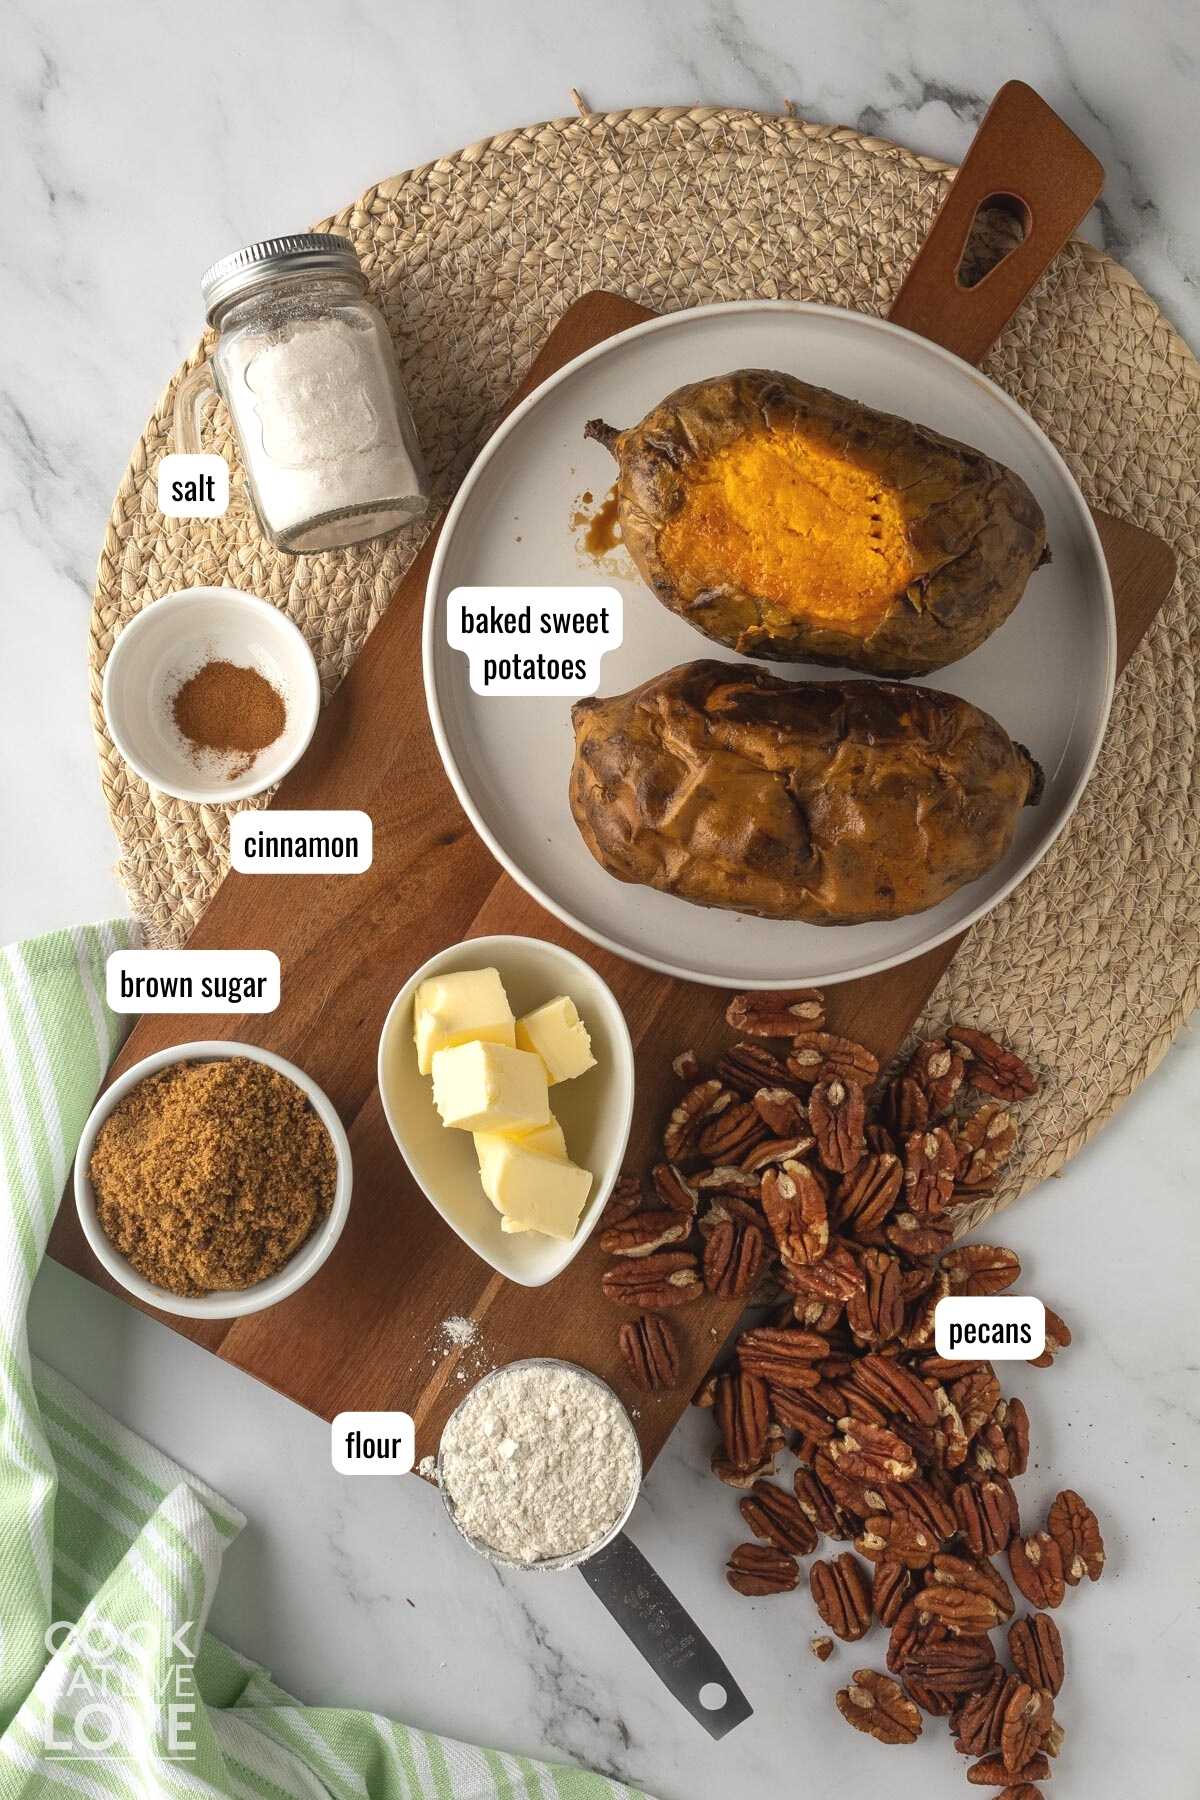 Overhead shot of ingredients needed to make sweet potato casserole with their names listed near them in text boxes.